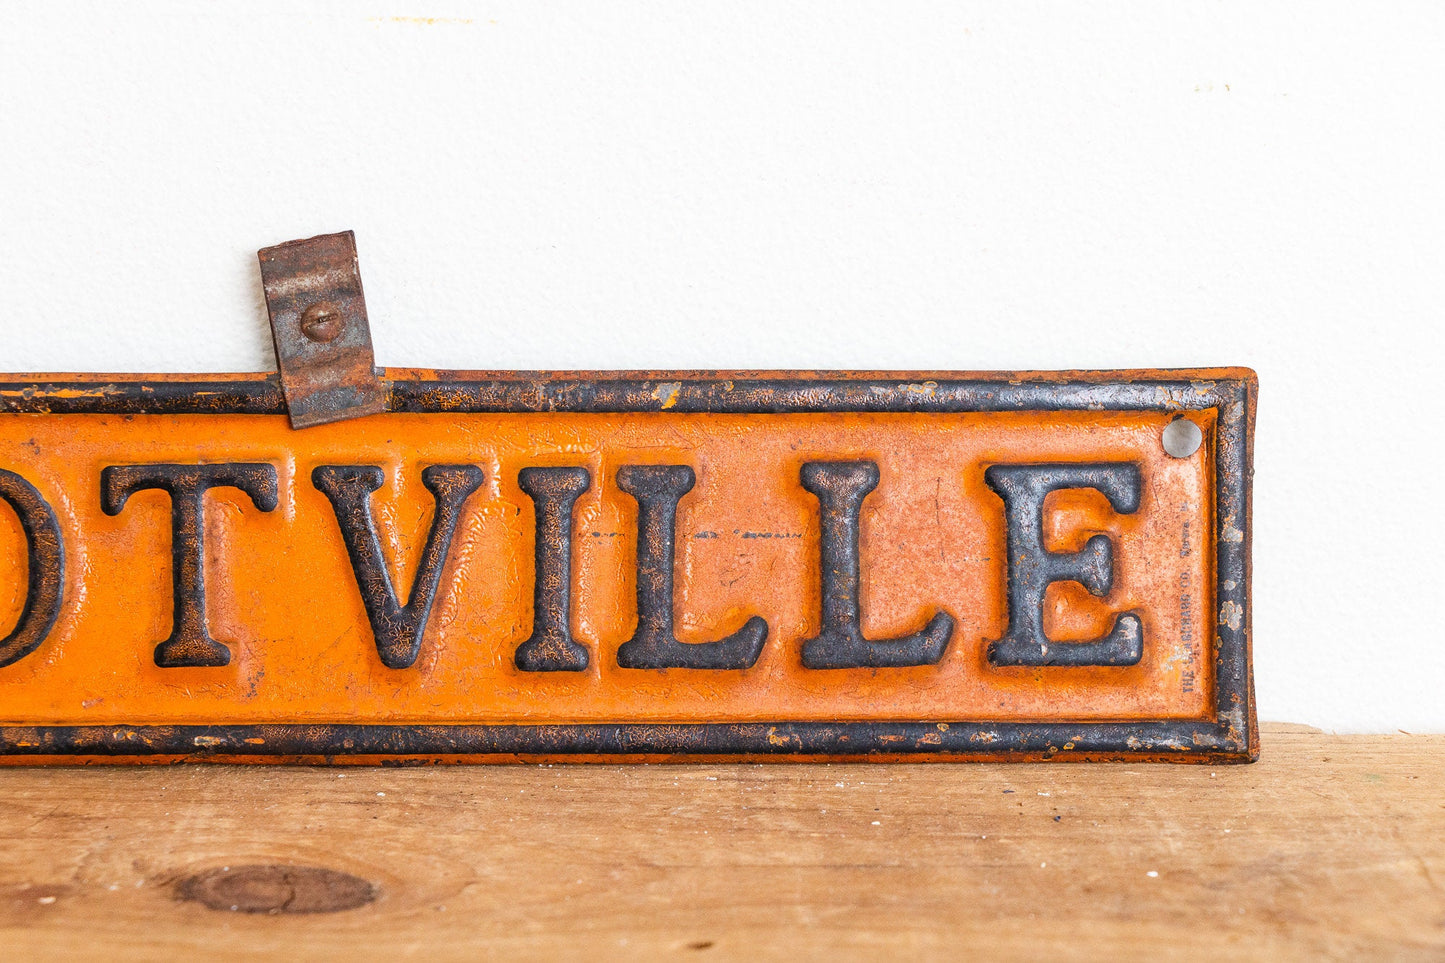 Footville License Plate Topper Vintage Embossed Automotive Collectible - Eagle's Eye Finds